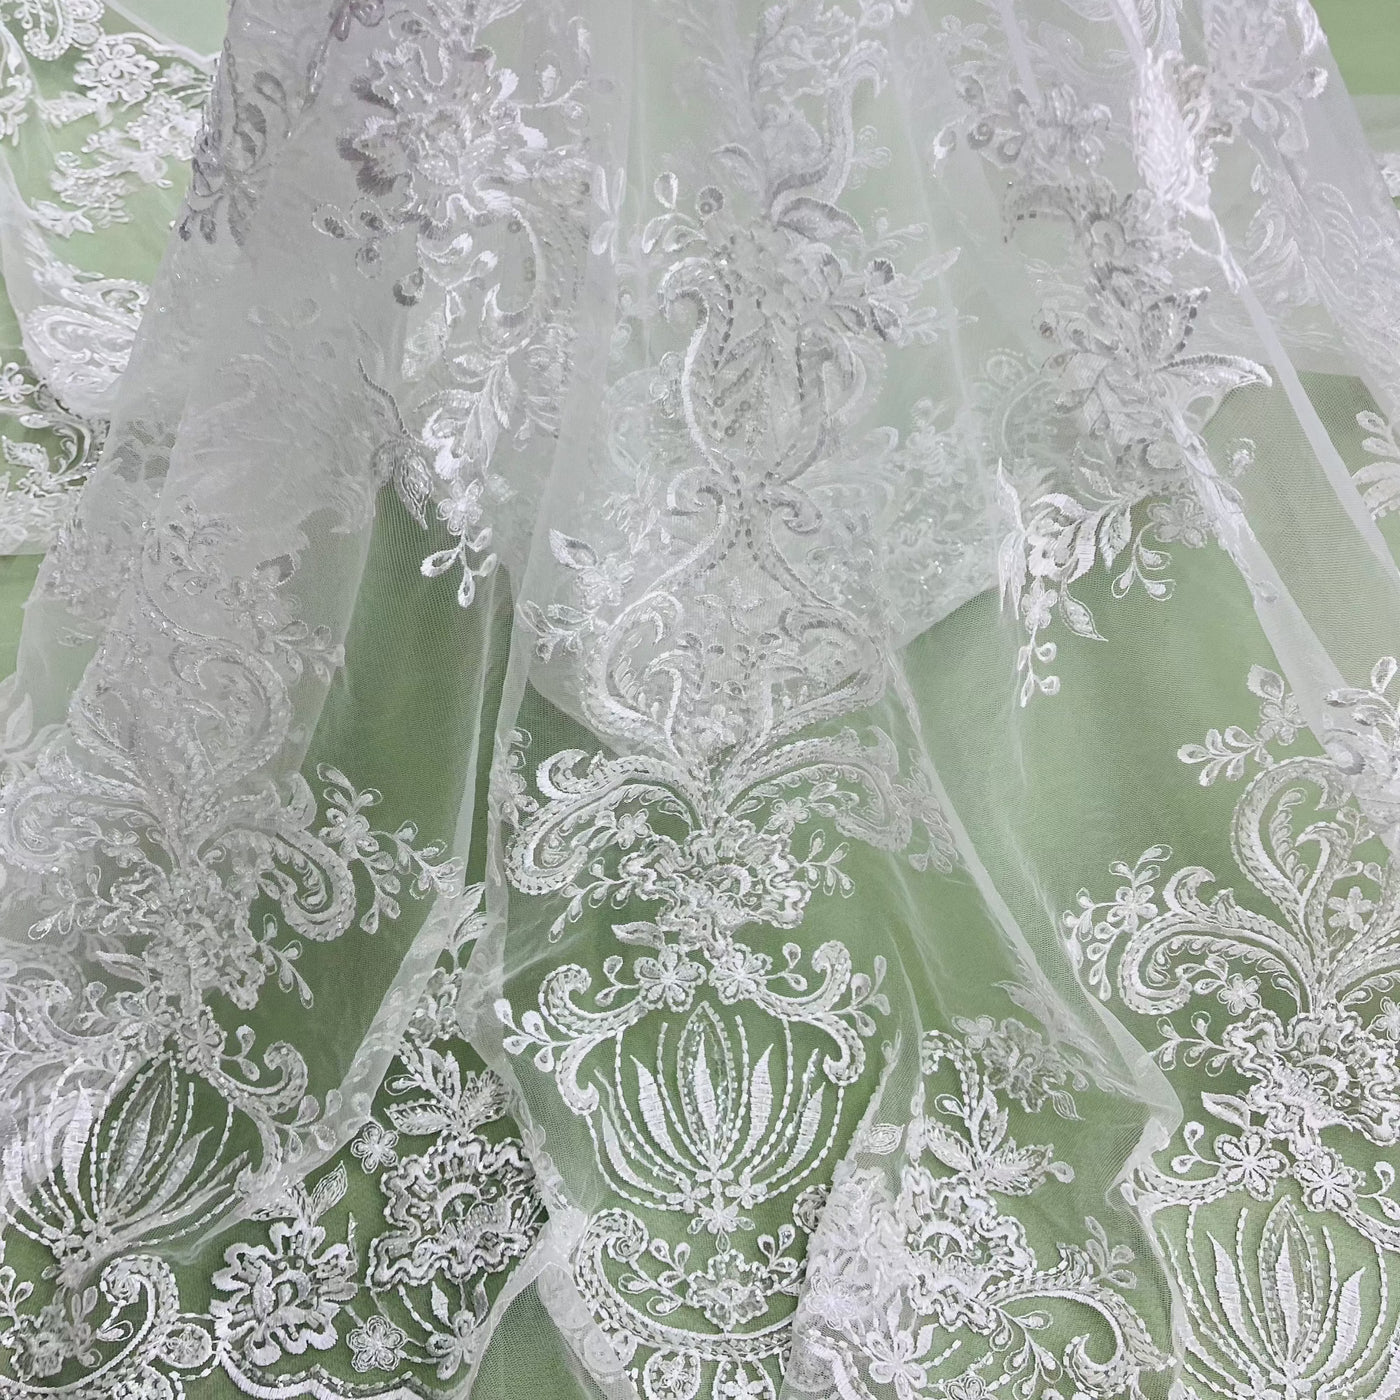 Beaded Lace Fabric Embroidered on 100% Polyester Net Mesh | Lace USA - GD-12186 Ivory